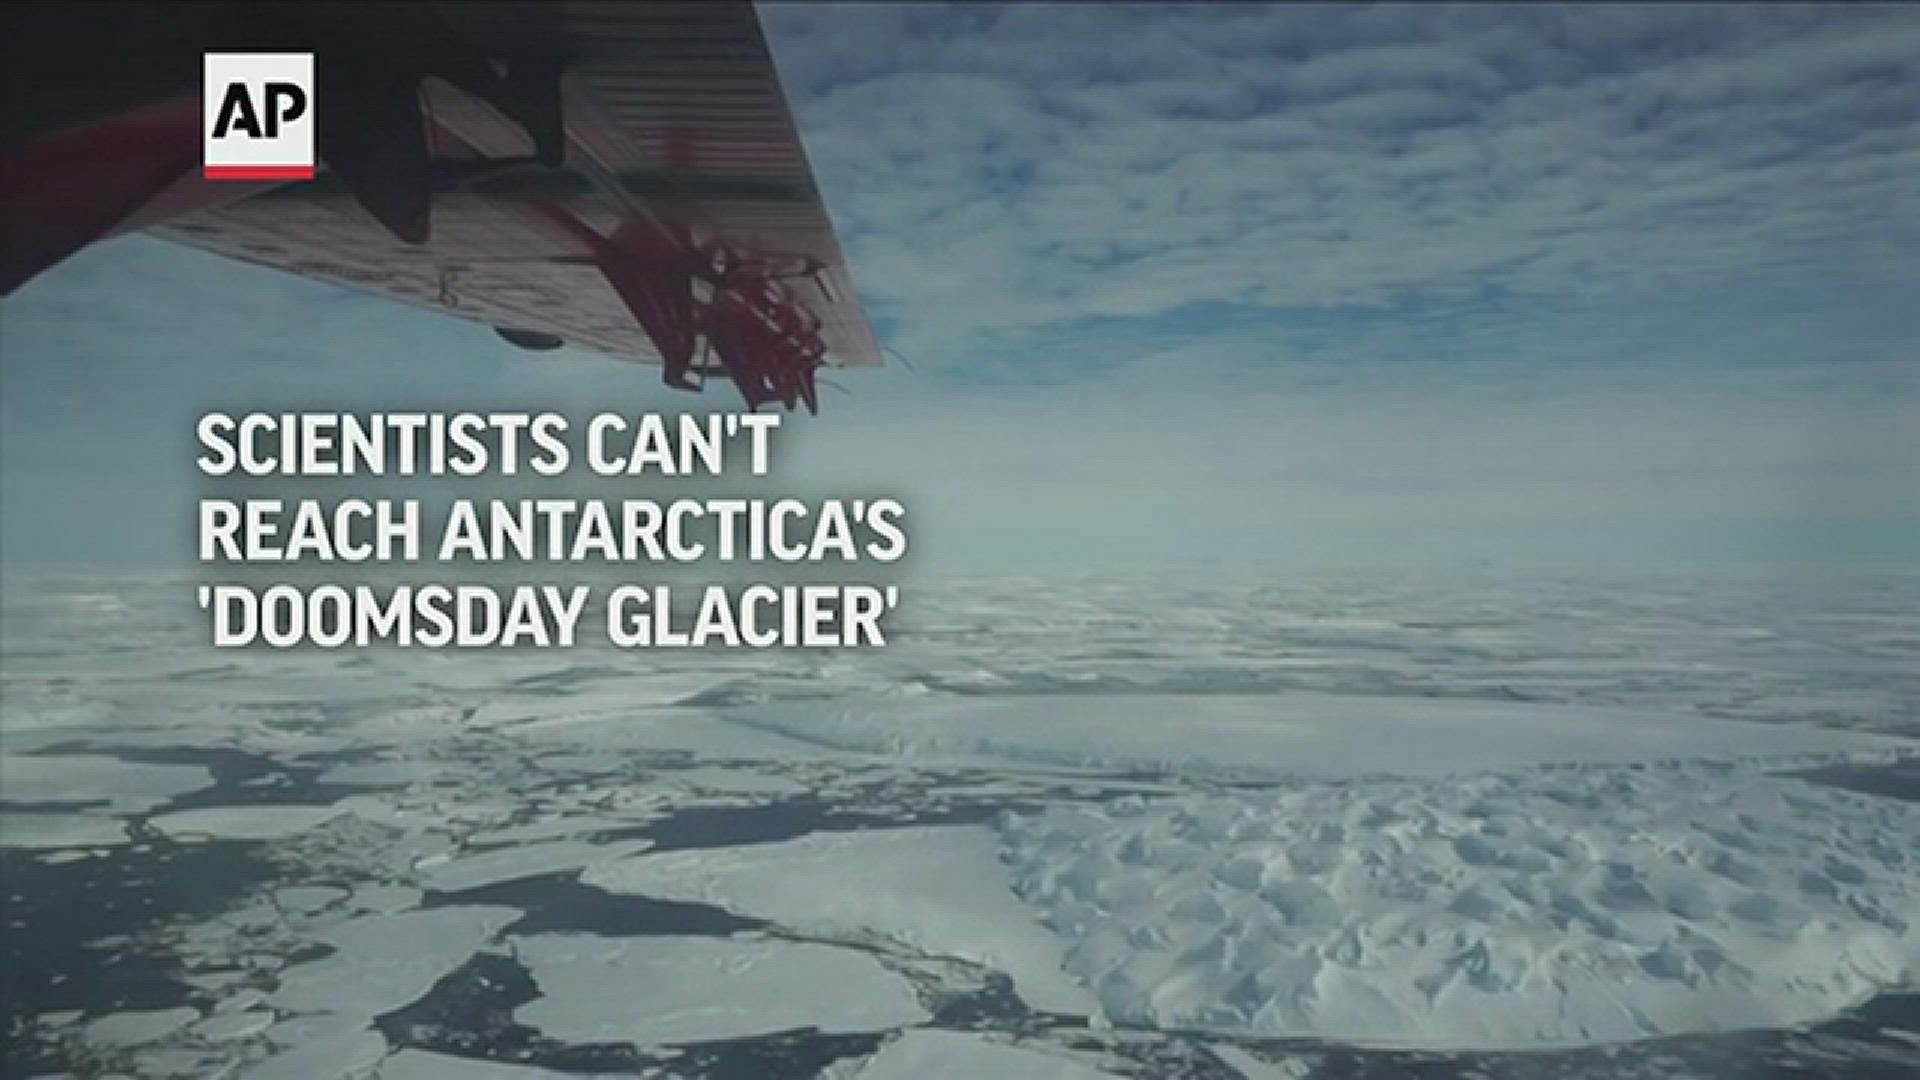 Antarctica's so-called Doomsday Glacier, nicknamed because it is huge and coming apart, is mostly thwarting an international effort to study it.